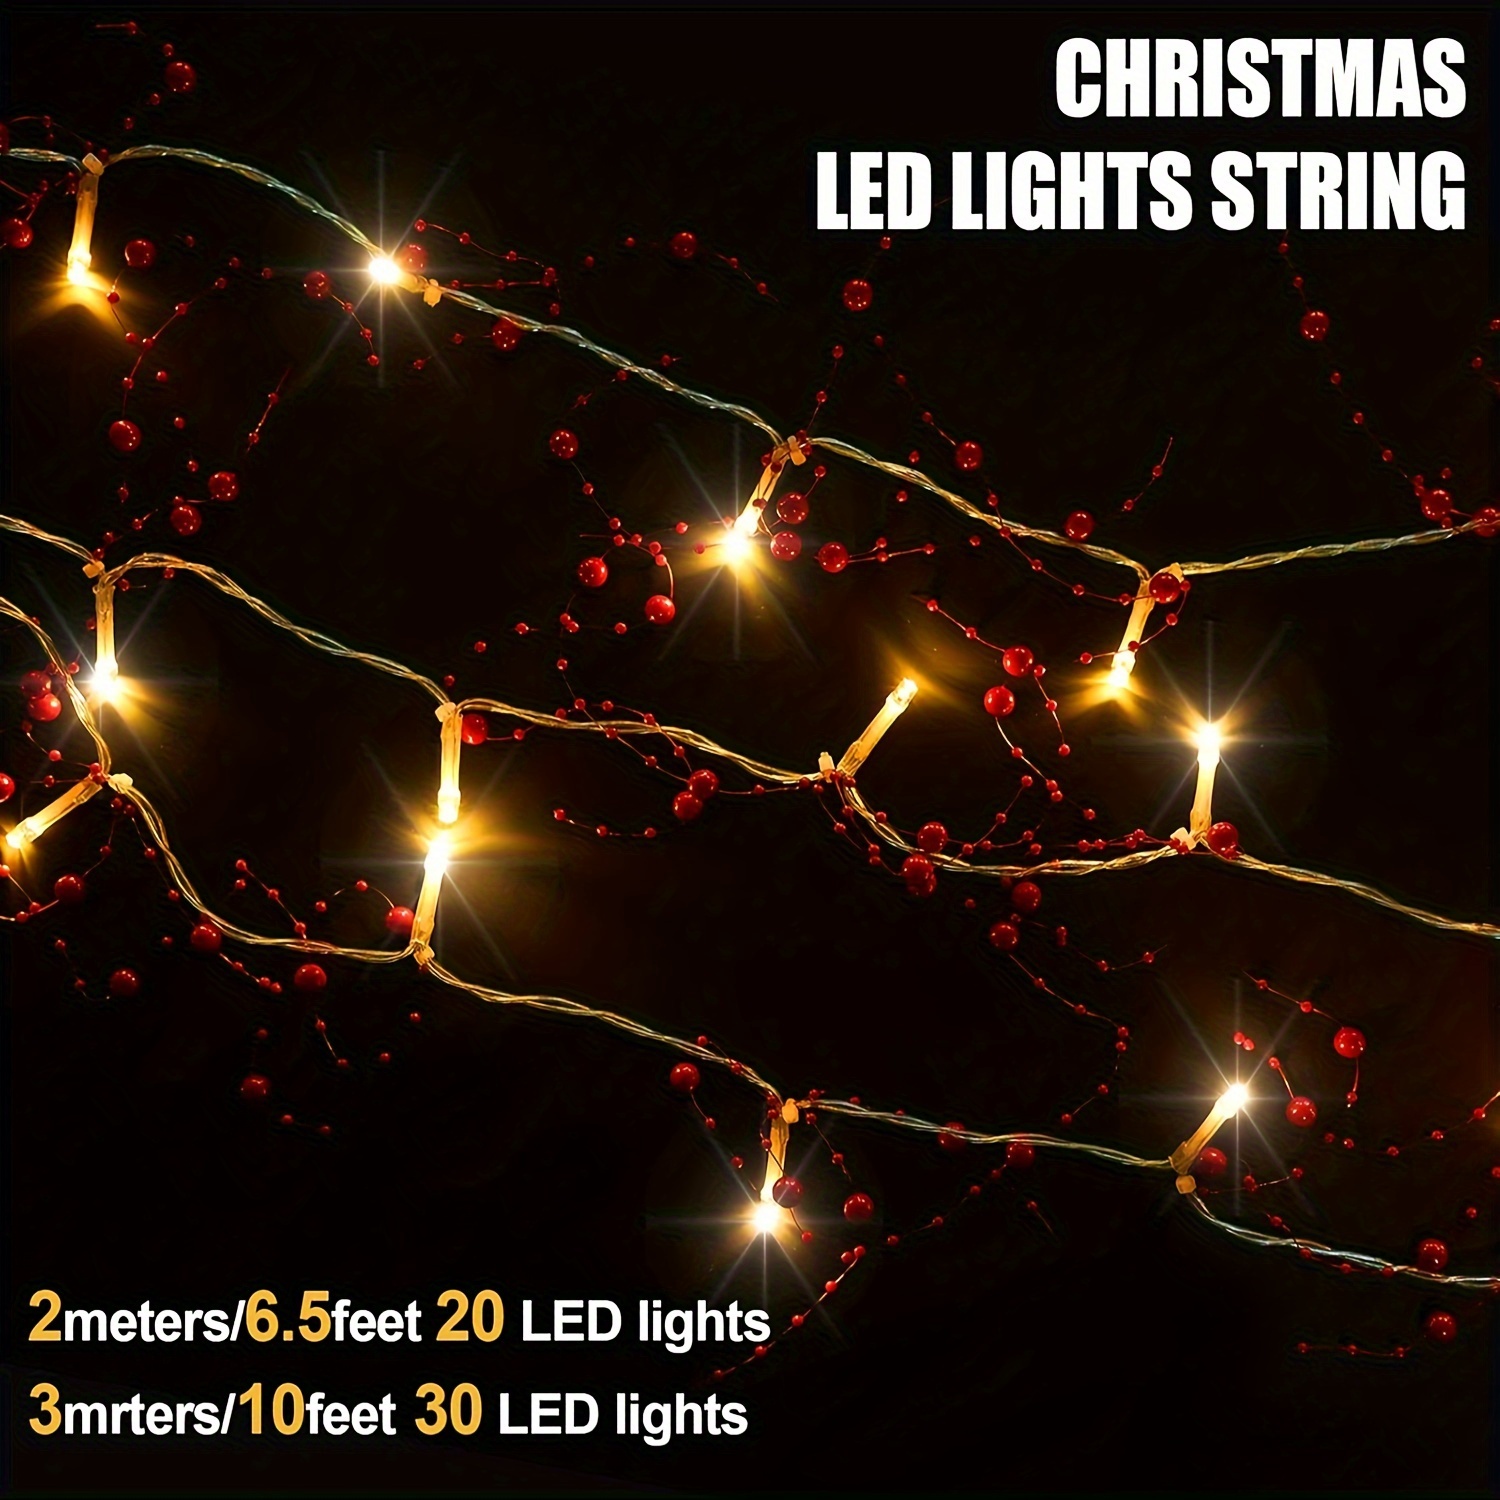 Light Chain Pearl - Christmas & decorative lighting for indoors